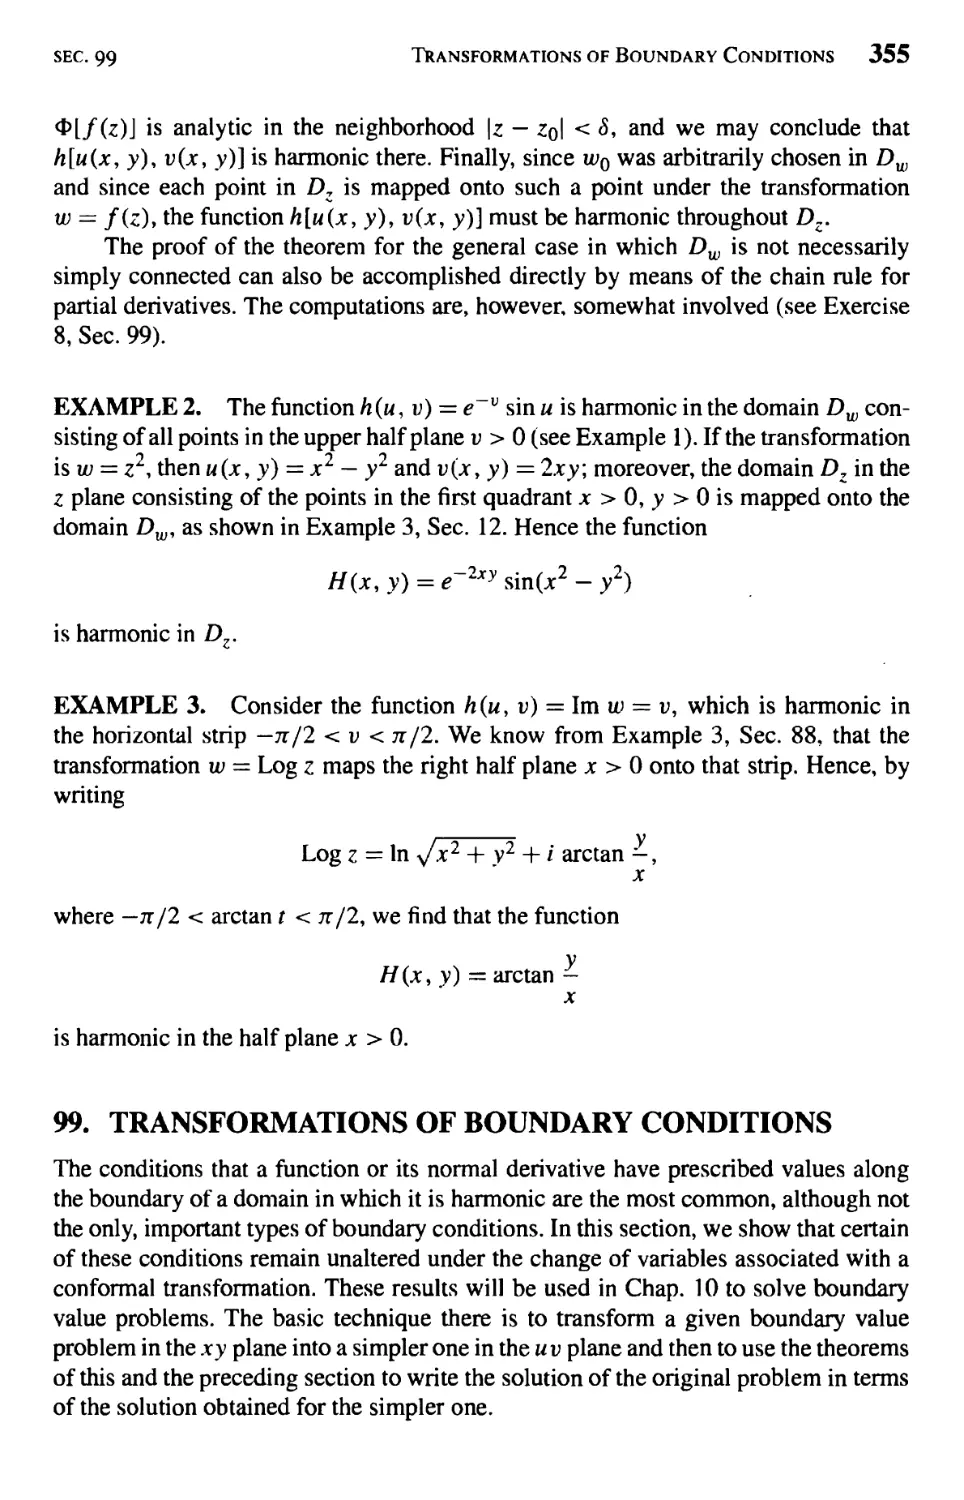 Transformations of Boundary Conditions